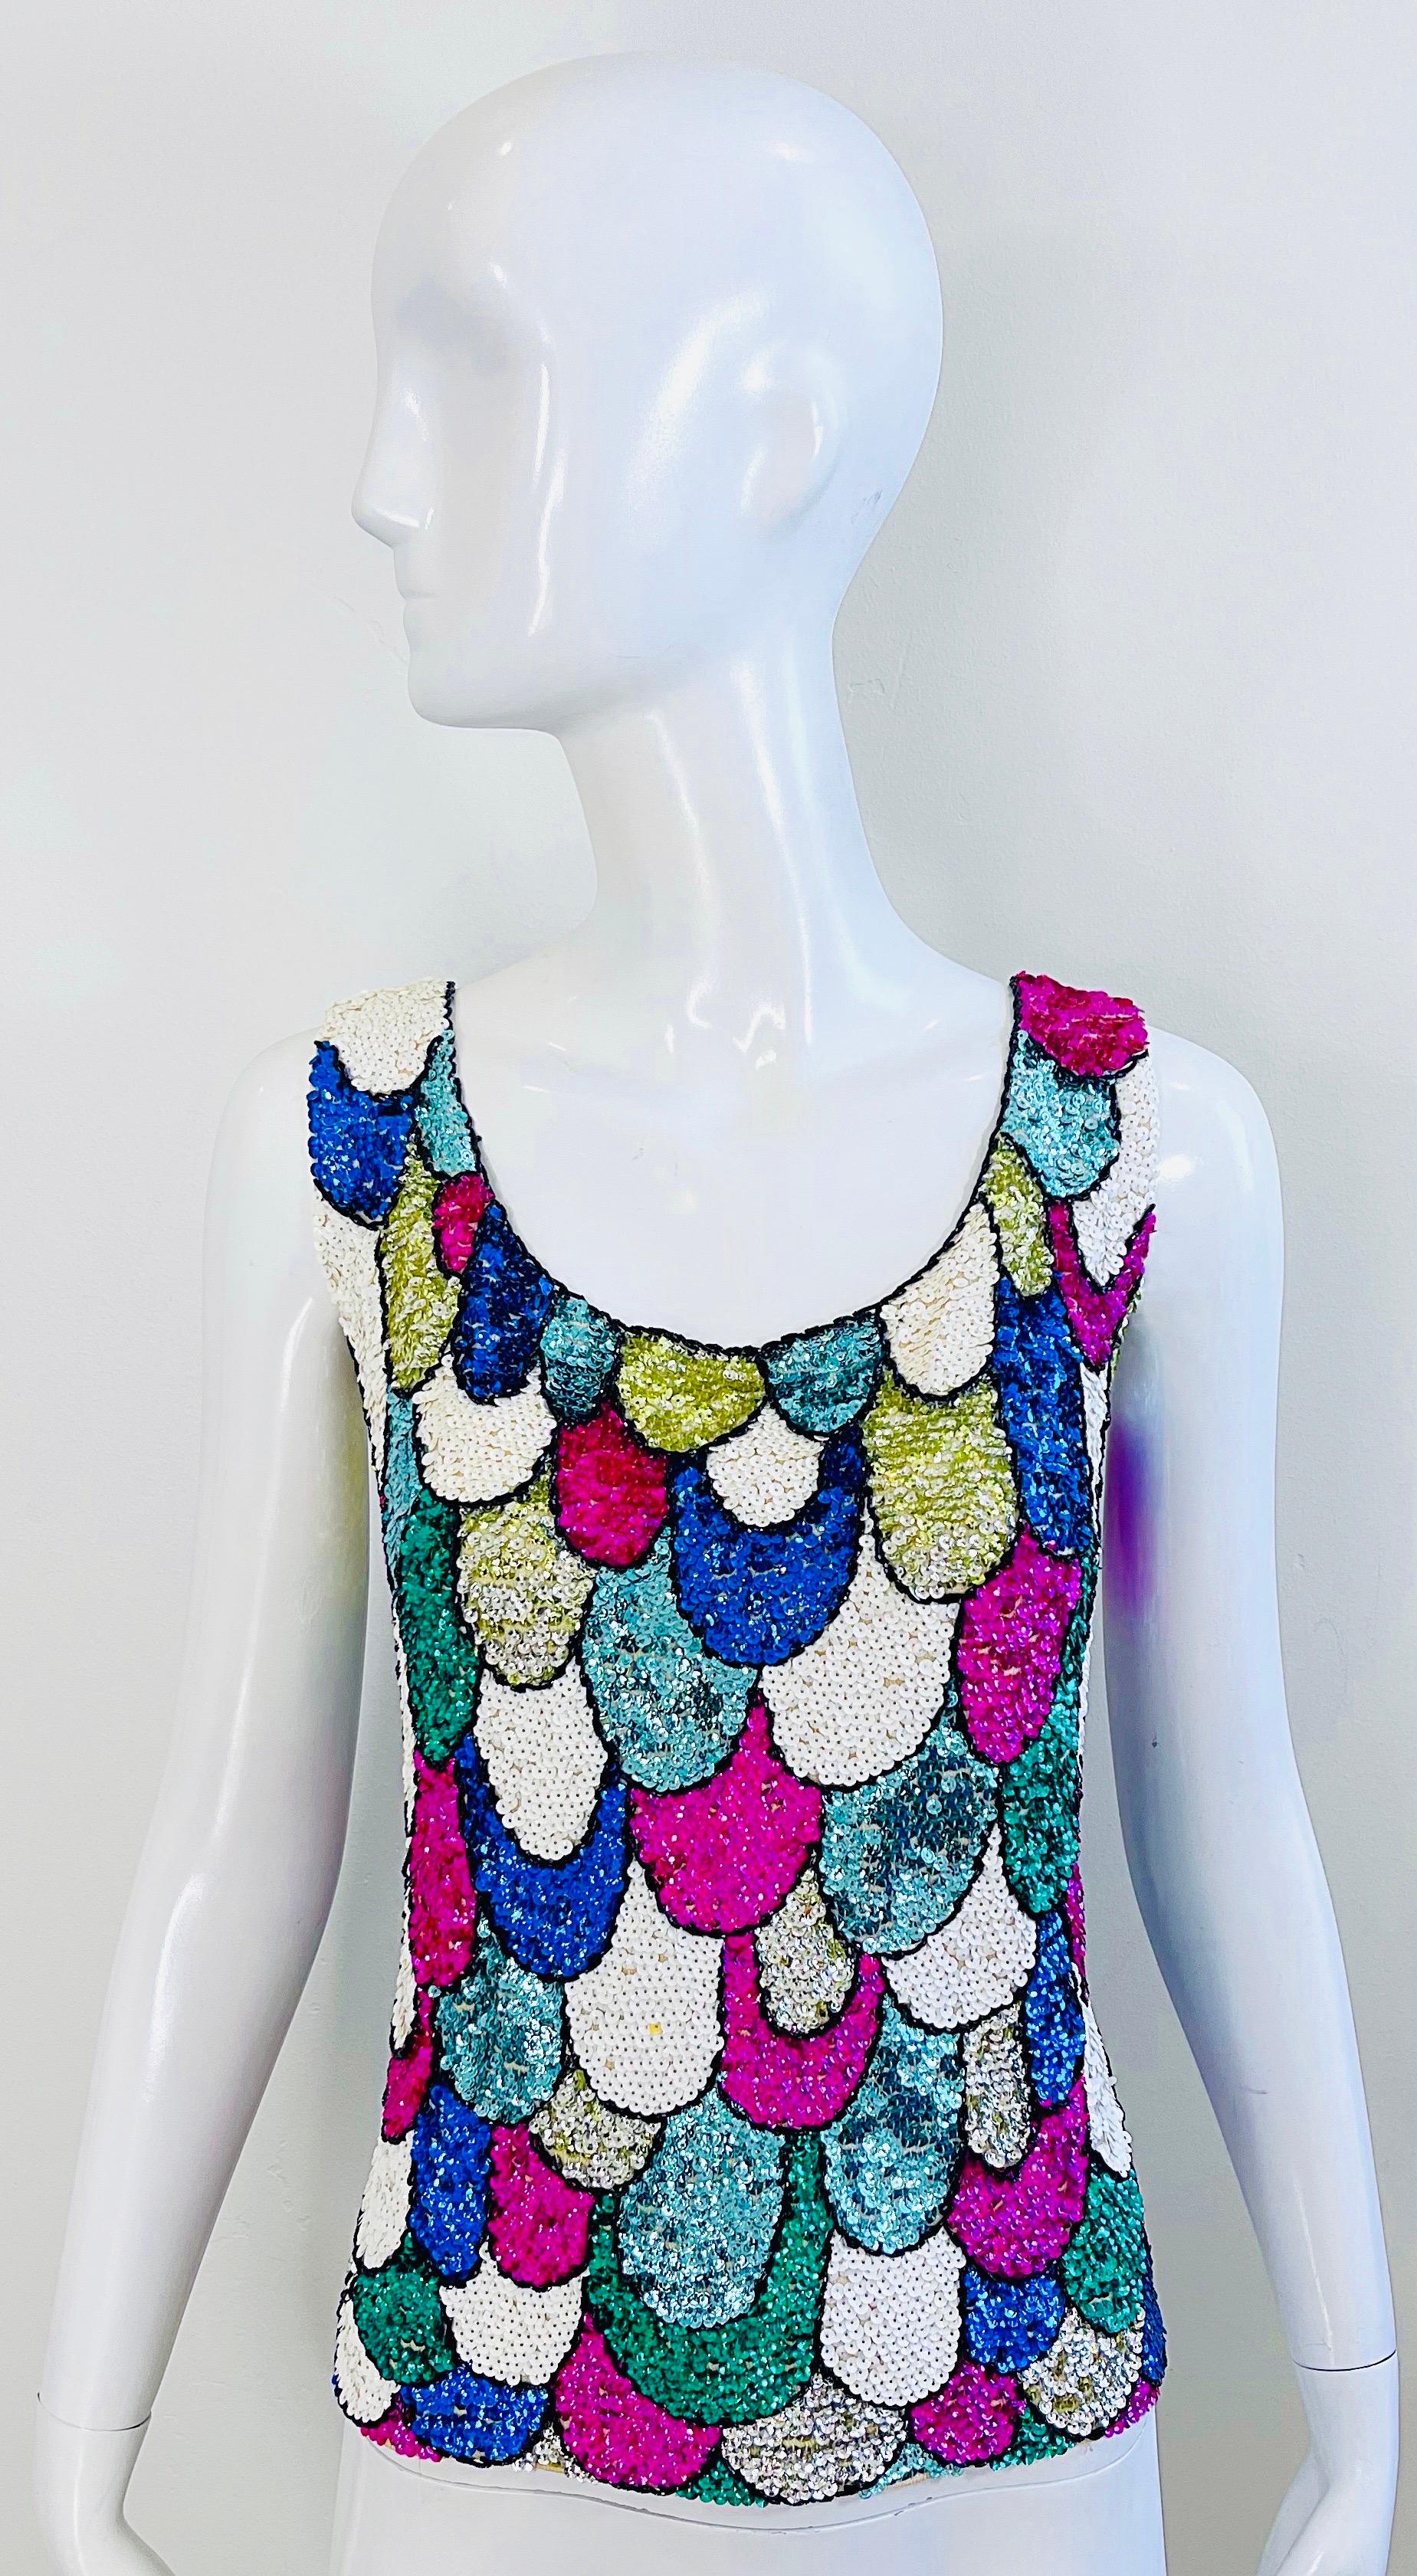 Chic British Hong Kong fully sequined colorful fish scale sleeveless sweater top ! Features vibrant colors of pink, turquoise, blue, chartreuse green, and white. Hidden. Metal zipper up the back with hook-and-eye closure. Super soft wool, and fully